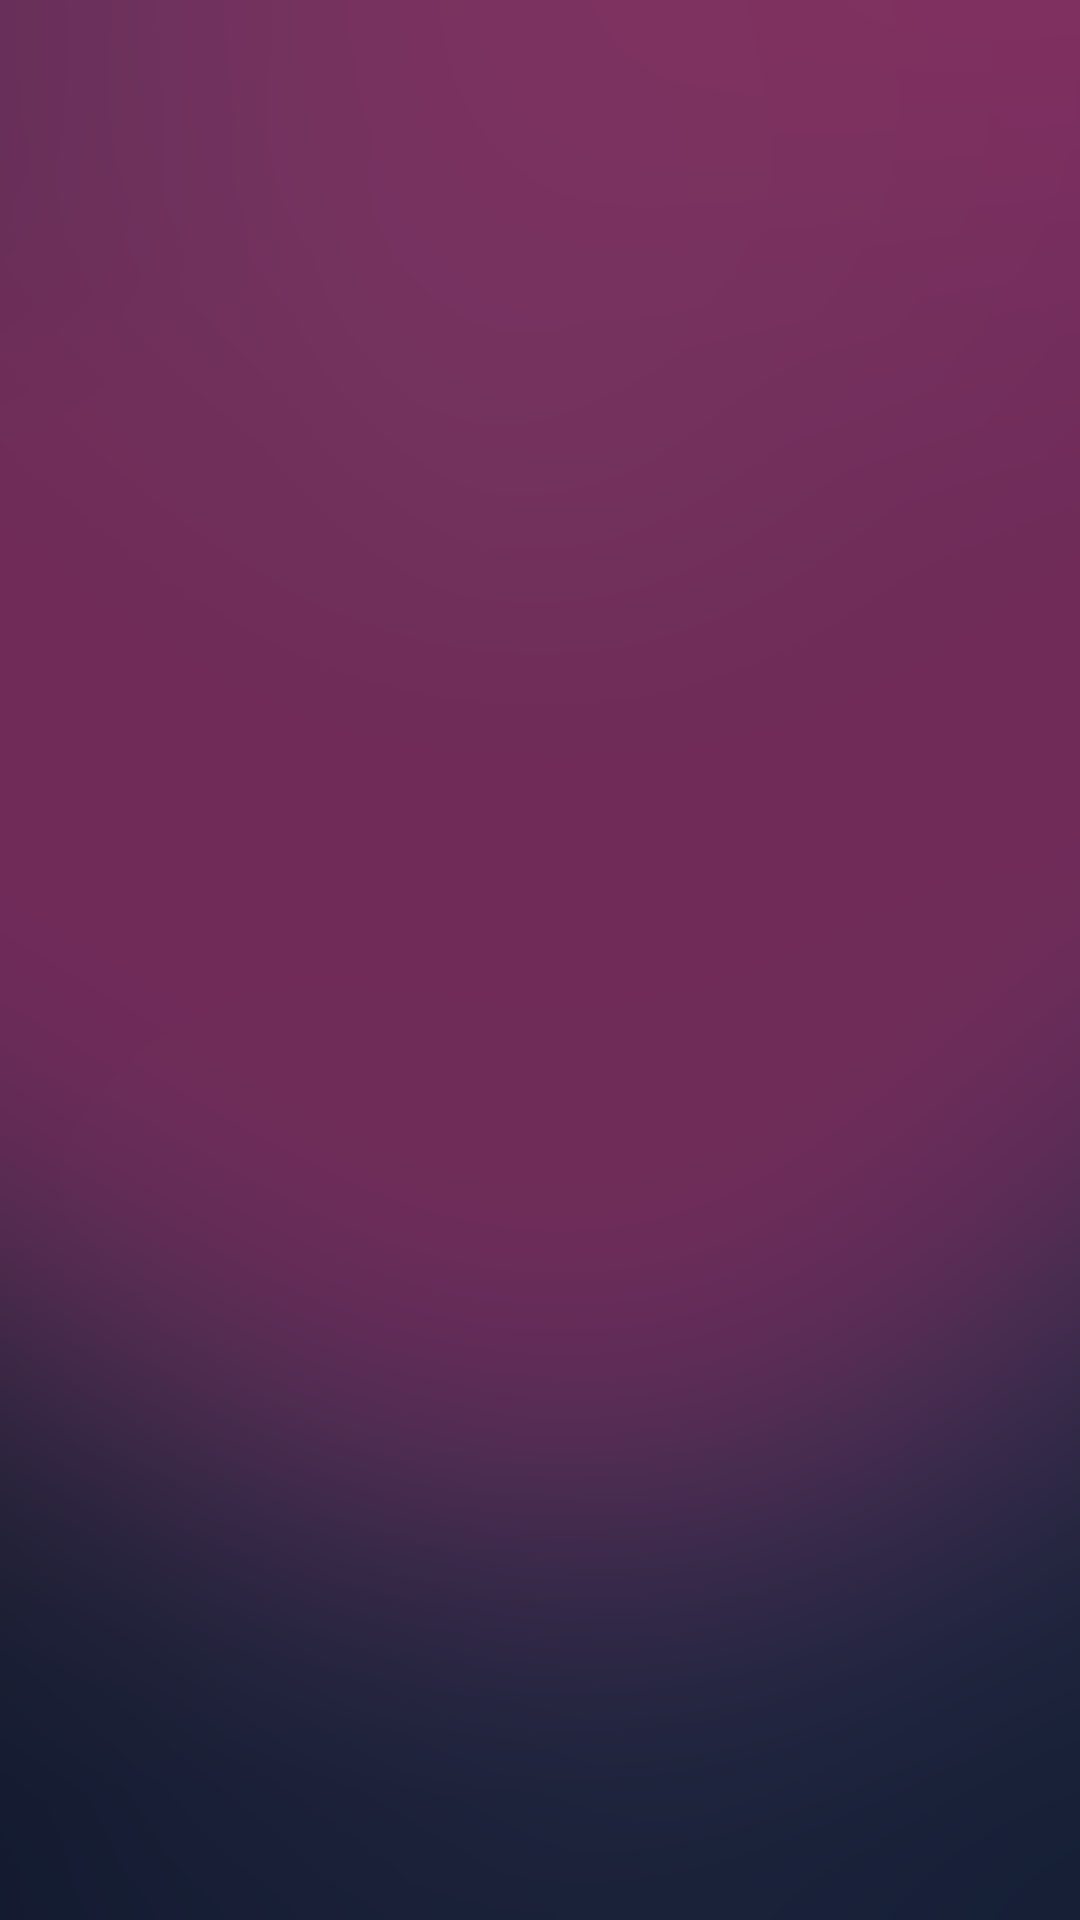 1080x1920 Simple Purple Gradient Samsung Android Wallpaper ...